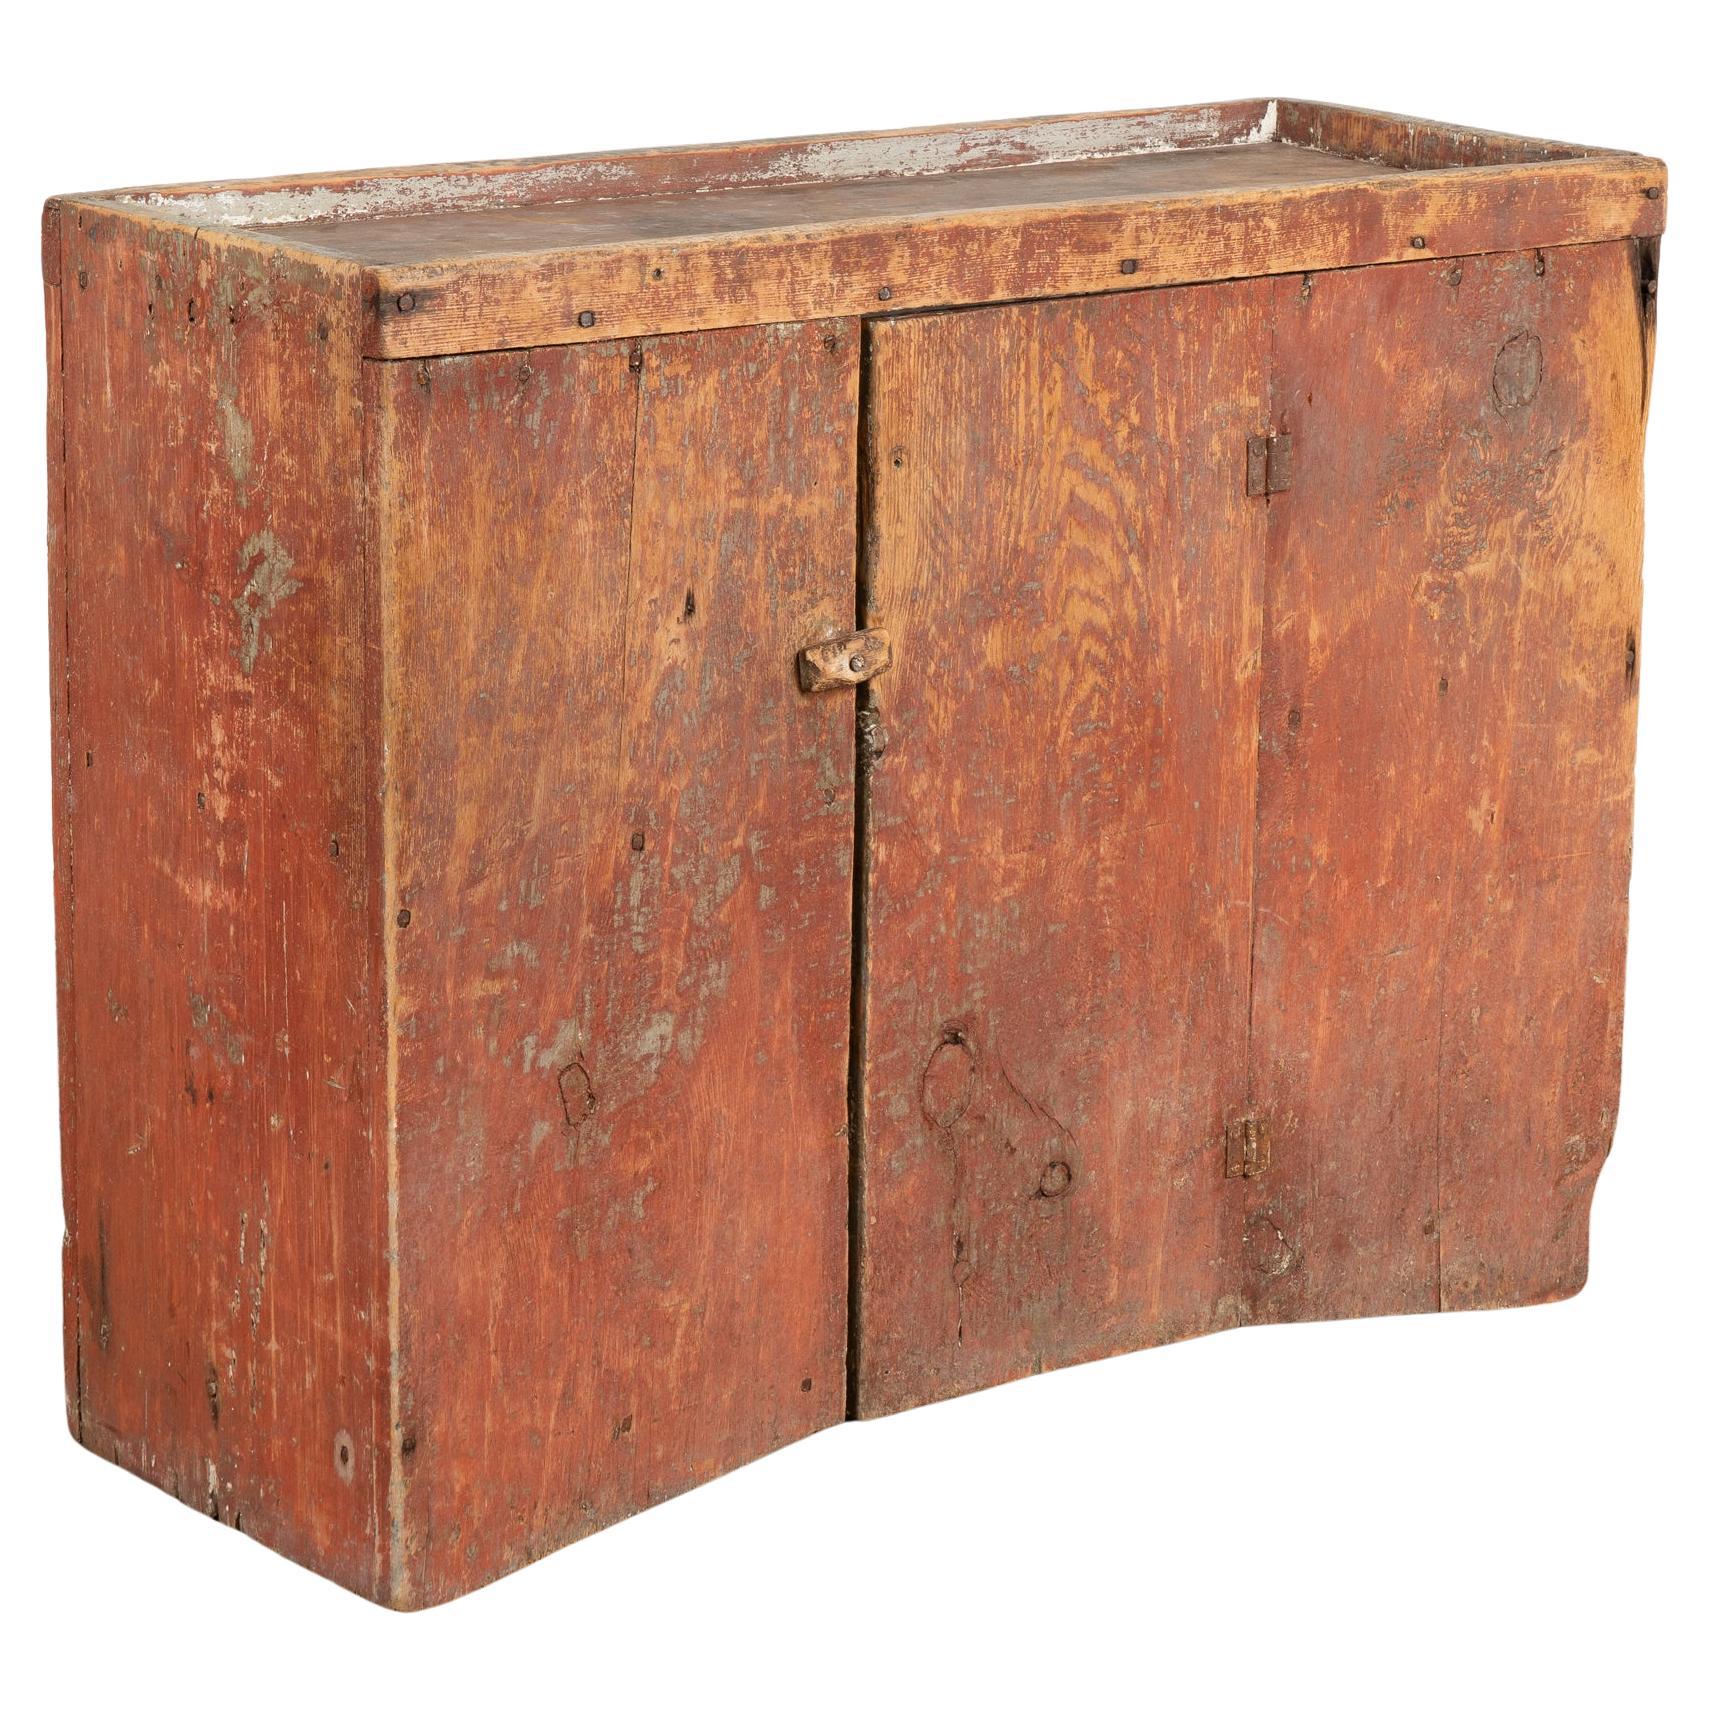 Original Red Painted Rustic Narrow Pine Cabinet, Sweden circa 1840-60 For Sale